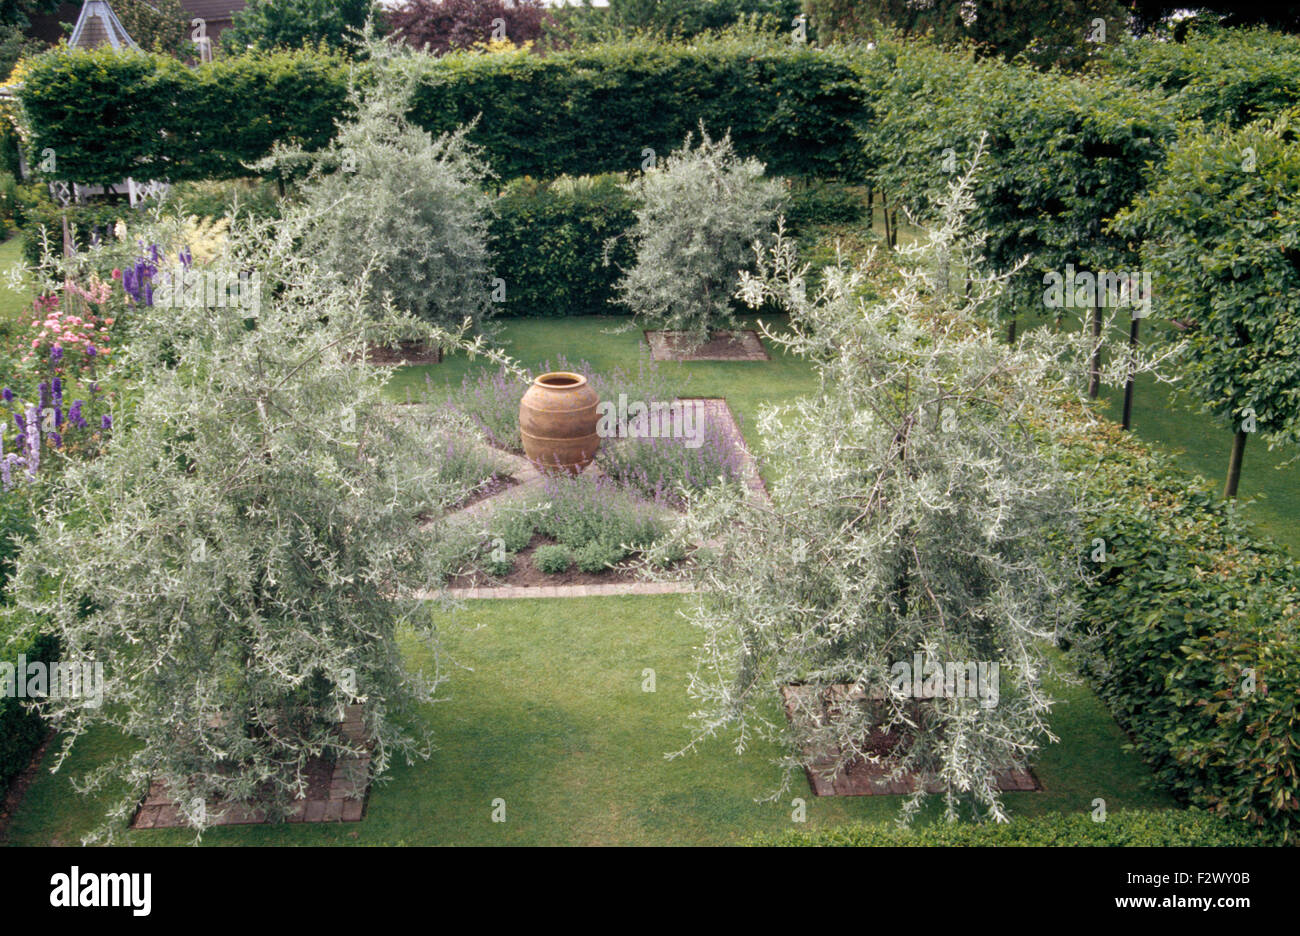 Weeping pear trees growing in corners of lawn with small central knot garden with a large pithoi pot Stock Photo